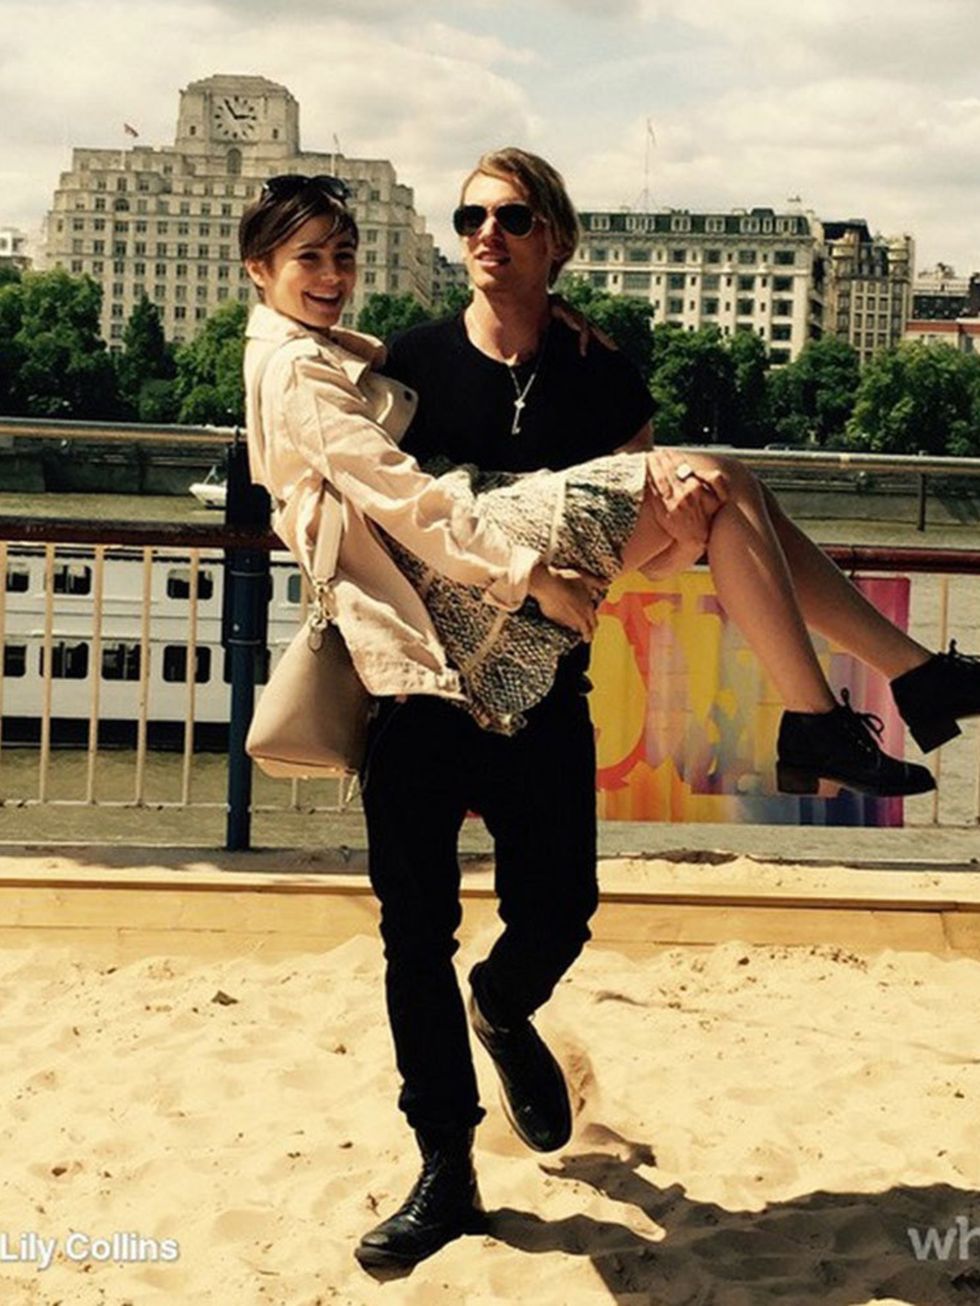 Lily Collins and Jamie Campbell Bower in London, June 2015.